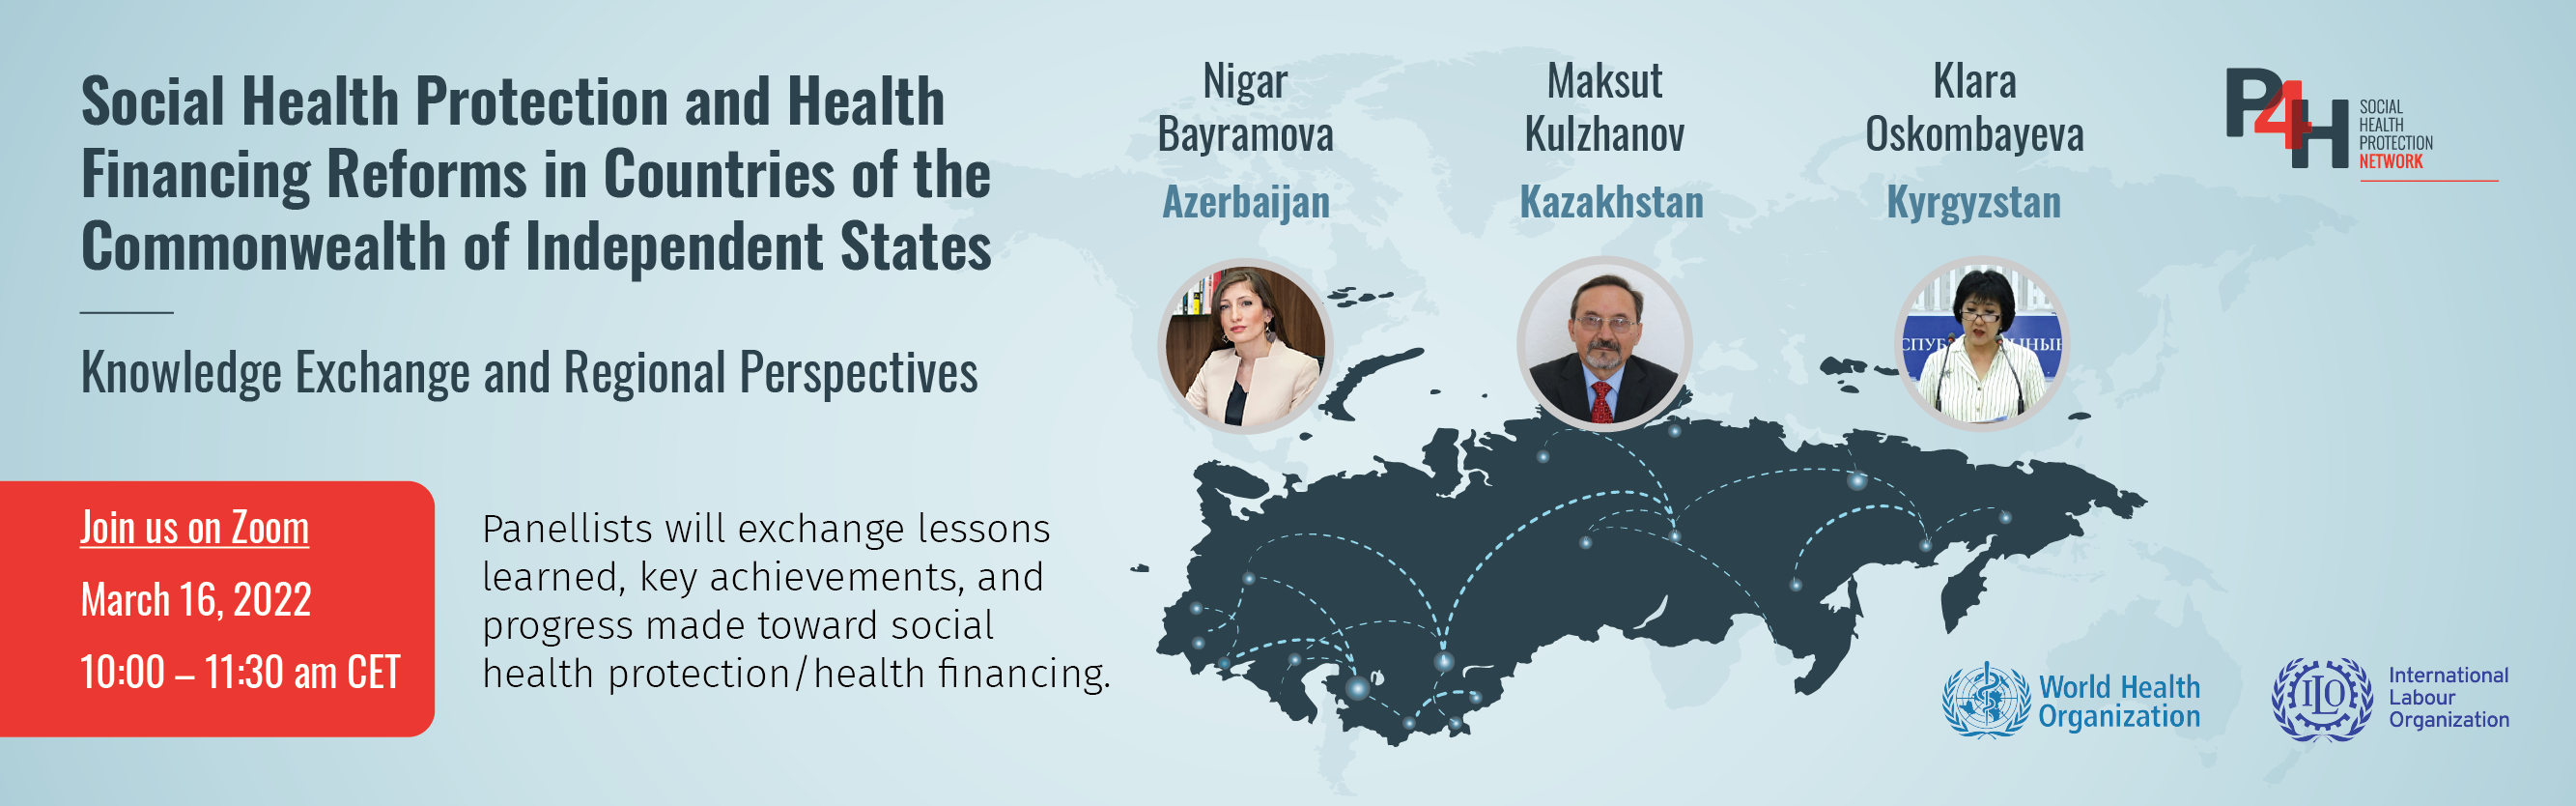 WEBINAR #1 on Social Health Protection and Health Financing Reforms in the CIS